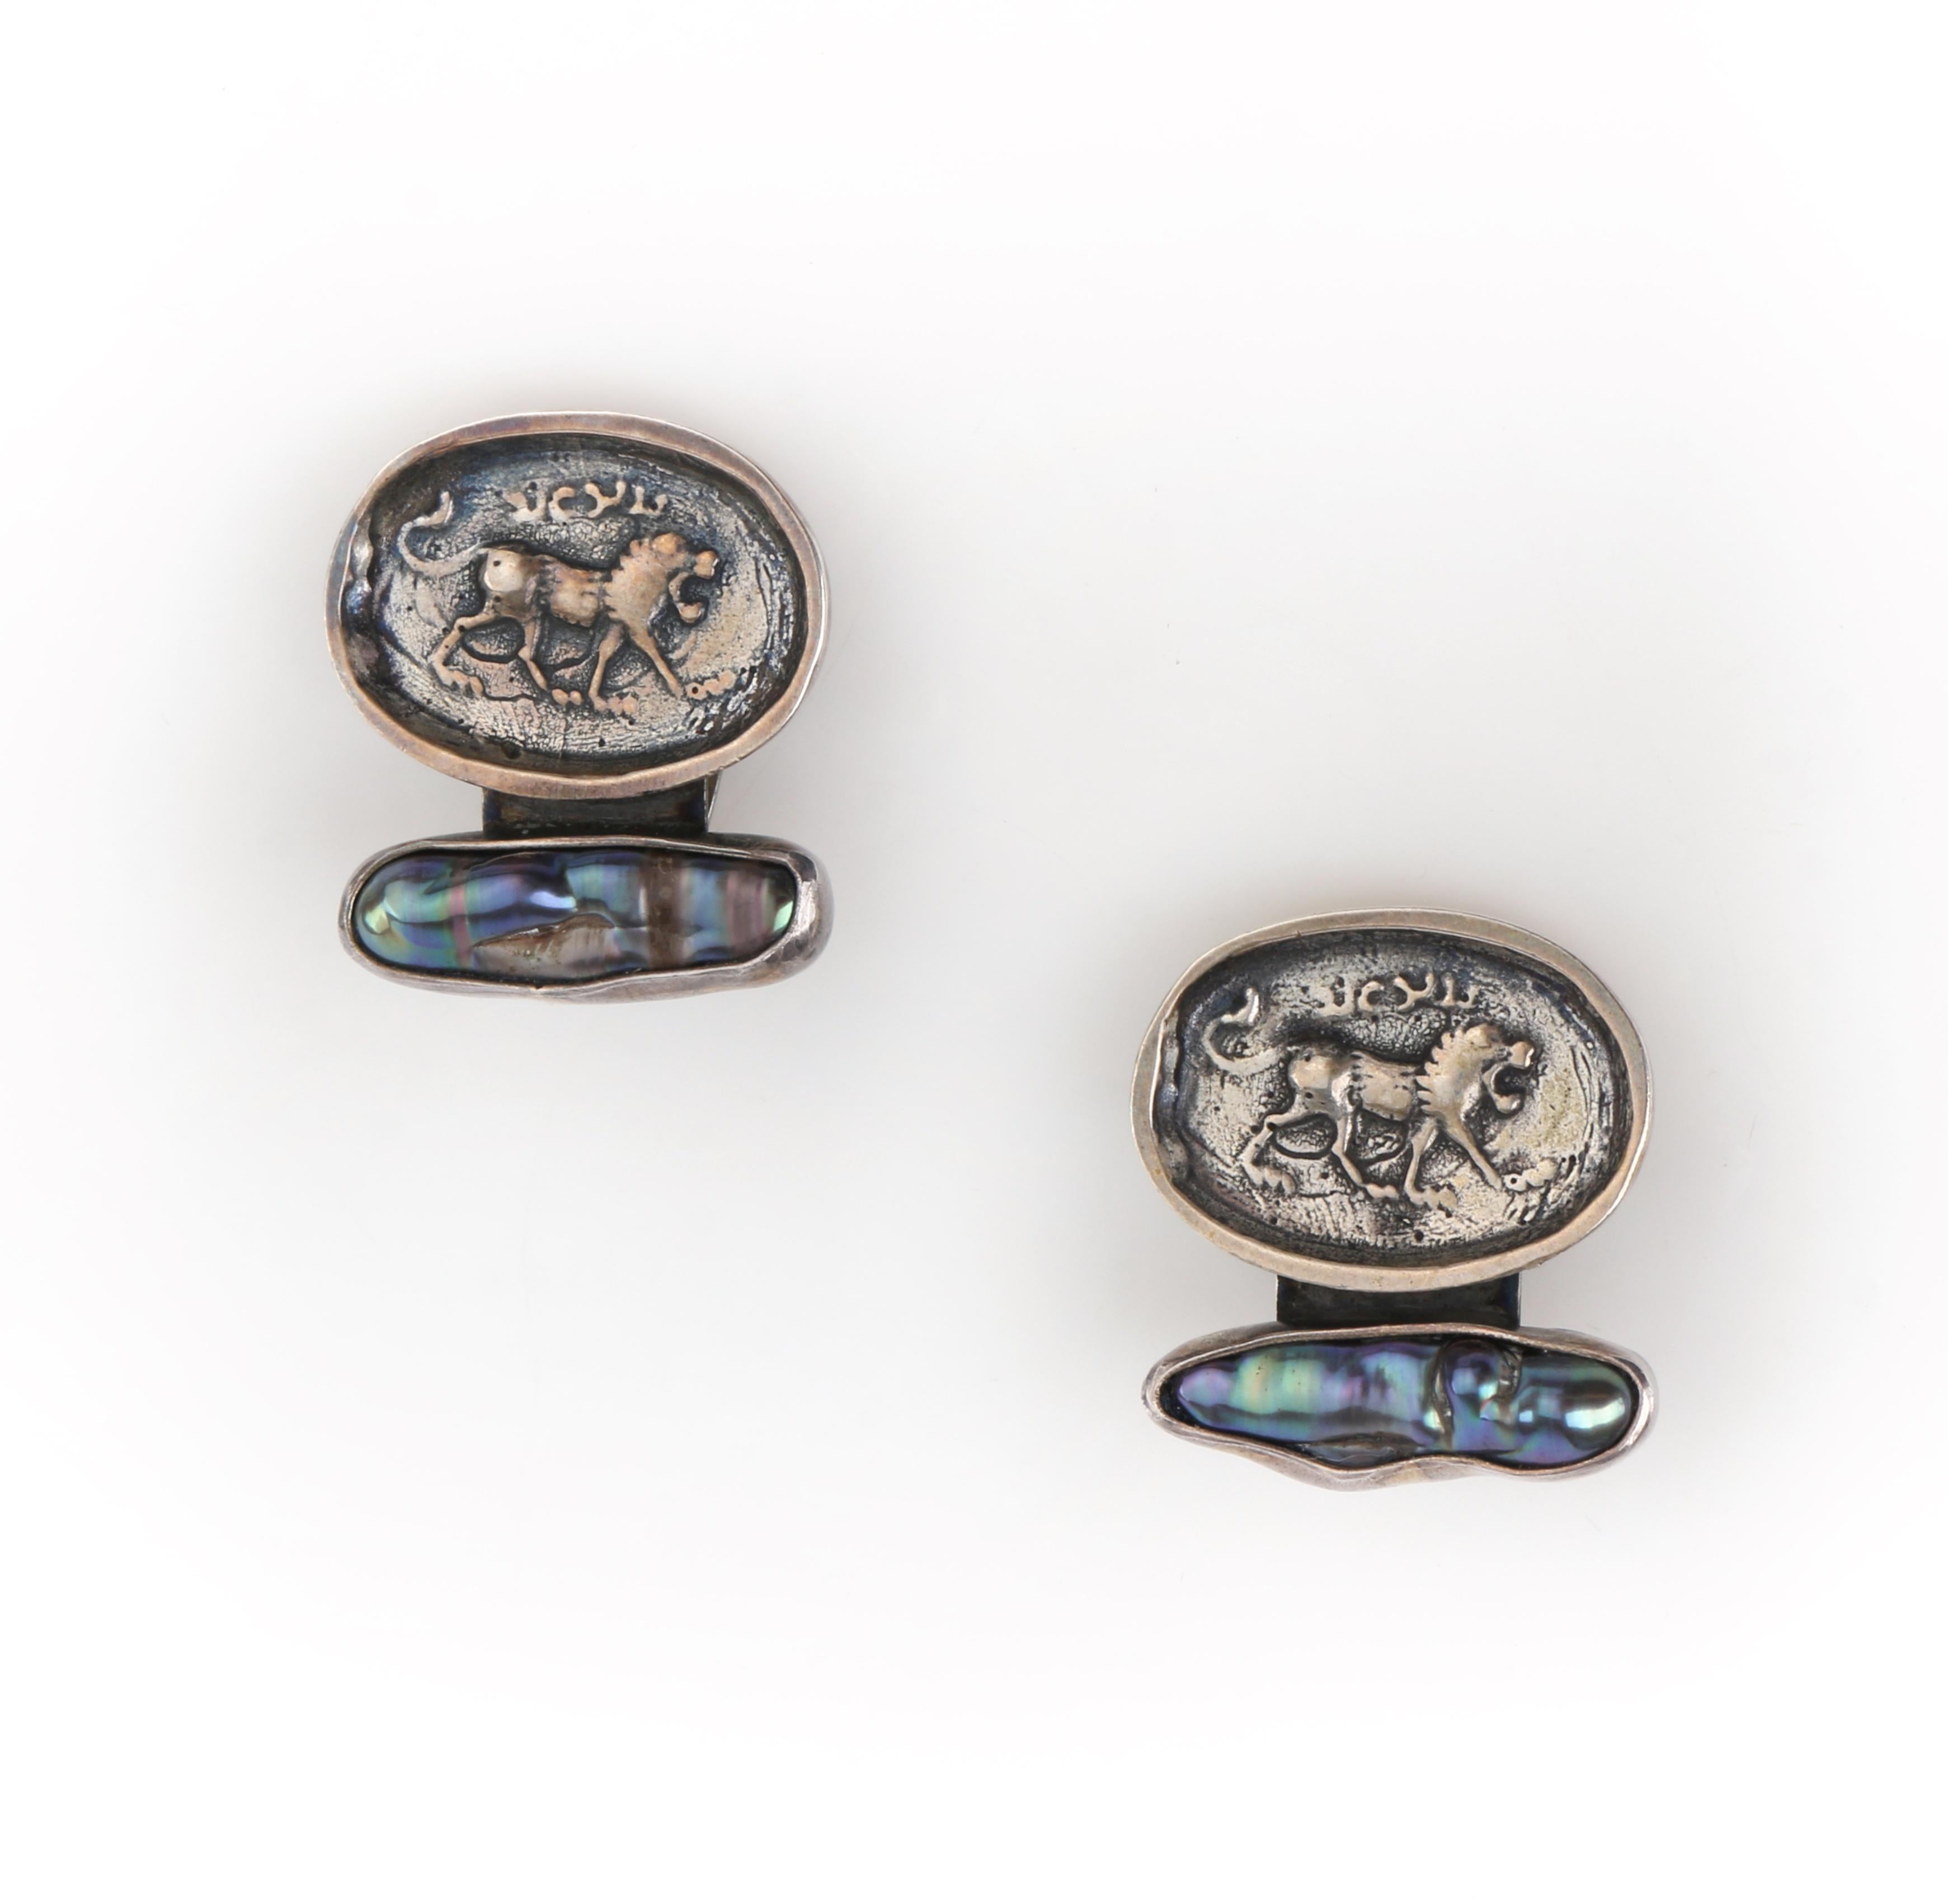 One of a Kind: REBECCA COLLINS Sterling Silver Ancient Coin Biwa Pearl Stone Clip On Earrings
 
Brand / Manufacturer: Rebecca Collins 
Style: Clip-on earrings
Color(s): Shades of silver (metal); shades of grey, blue, purple (biwa pearl)
Marked